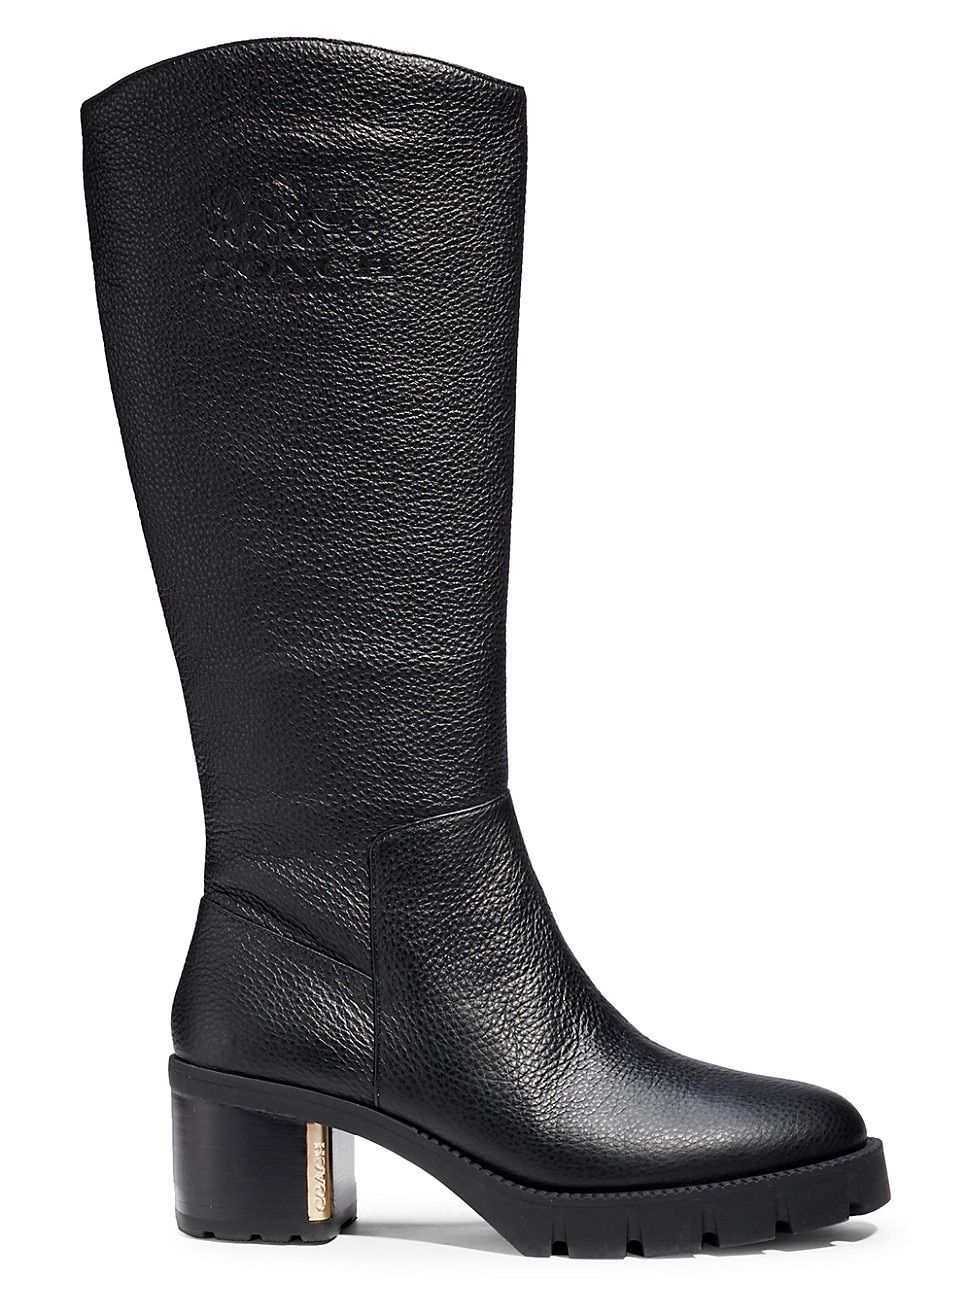 COACH Cindy Leather Knee-High Boots | Saks Fifth Avenue